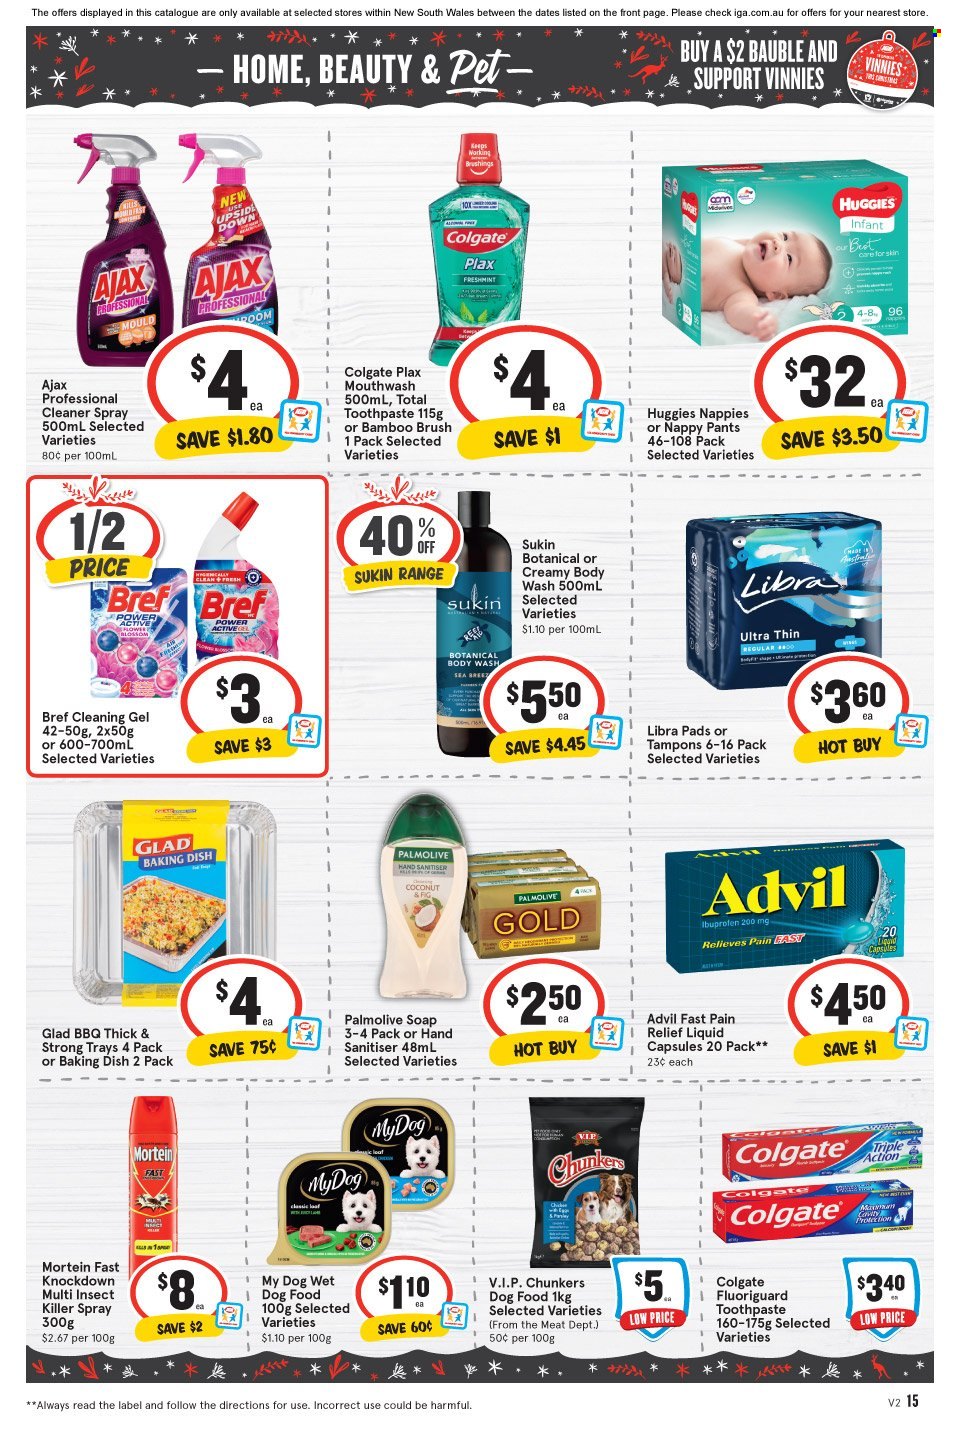 thumbnail - IGA Catalogue - 7 Dec 2022 - 13 Dec 2022 - Sales products - Blossom, Huggies, pants, nappies, cleaner, Bref Power, Mortein, Ajax, body wash, Palmolive, soap, Colgate, toothpaste, mouthwash, Plax, tampons, Sukin, insect killer, brush, bauble, animal food, dog food, wet dog food, pain relief, Ibuprofen, Advil Rapid. Page 11.